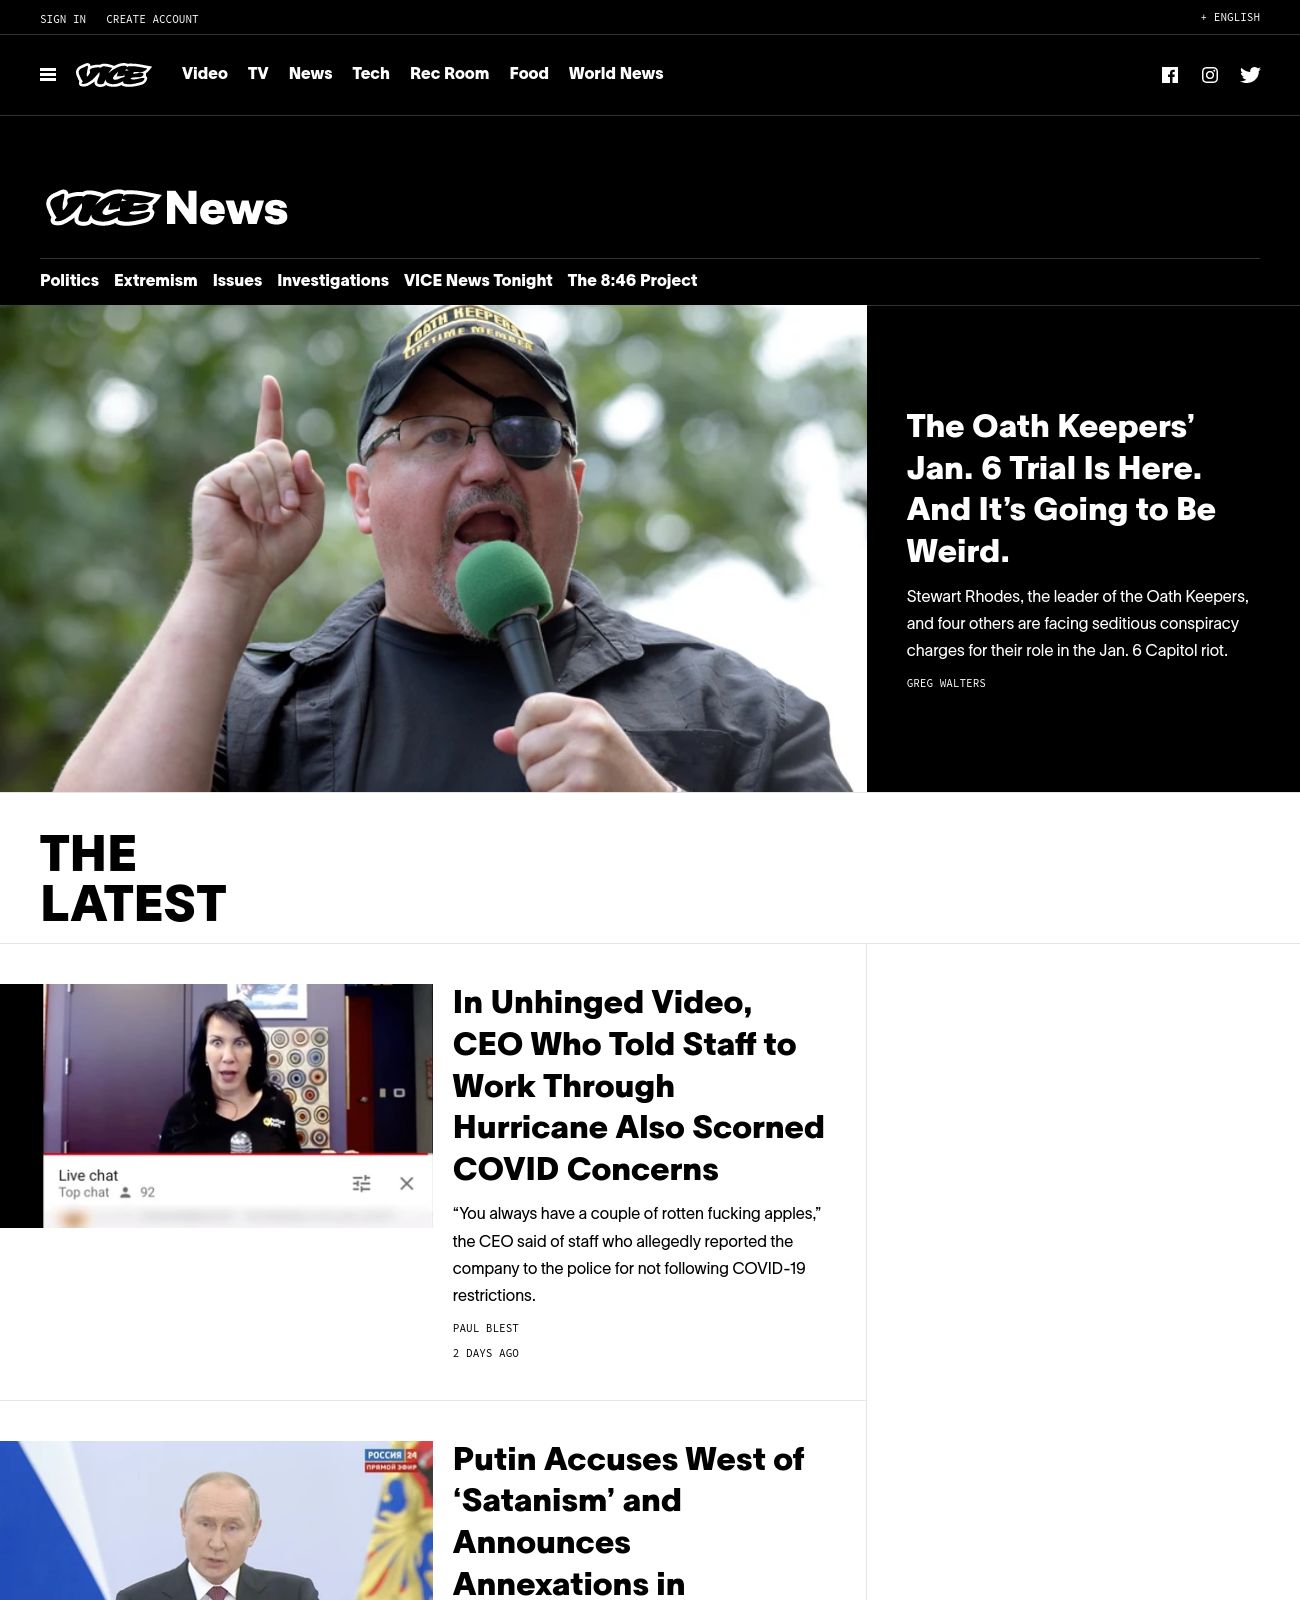 Vice News at 2022-10-02 01:52:03-04:00 local time